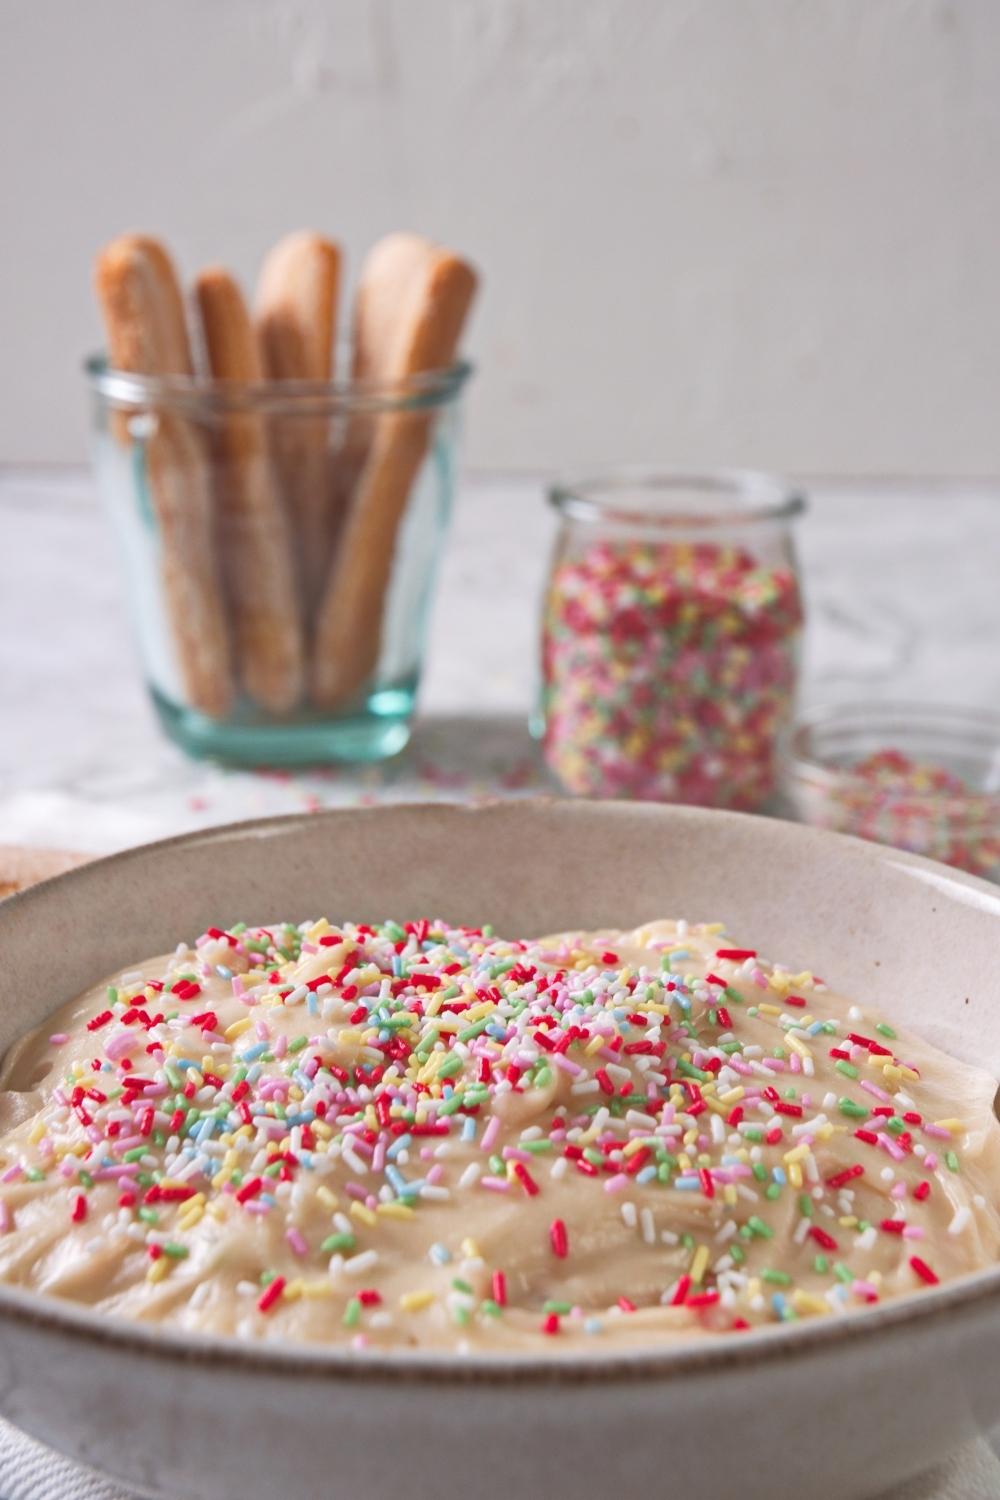 A close-up of a serving bowl containing homemade Dunkaroo dip topped with rainbow sprinkles.